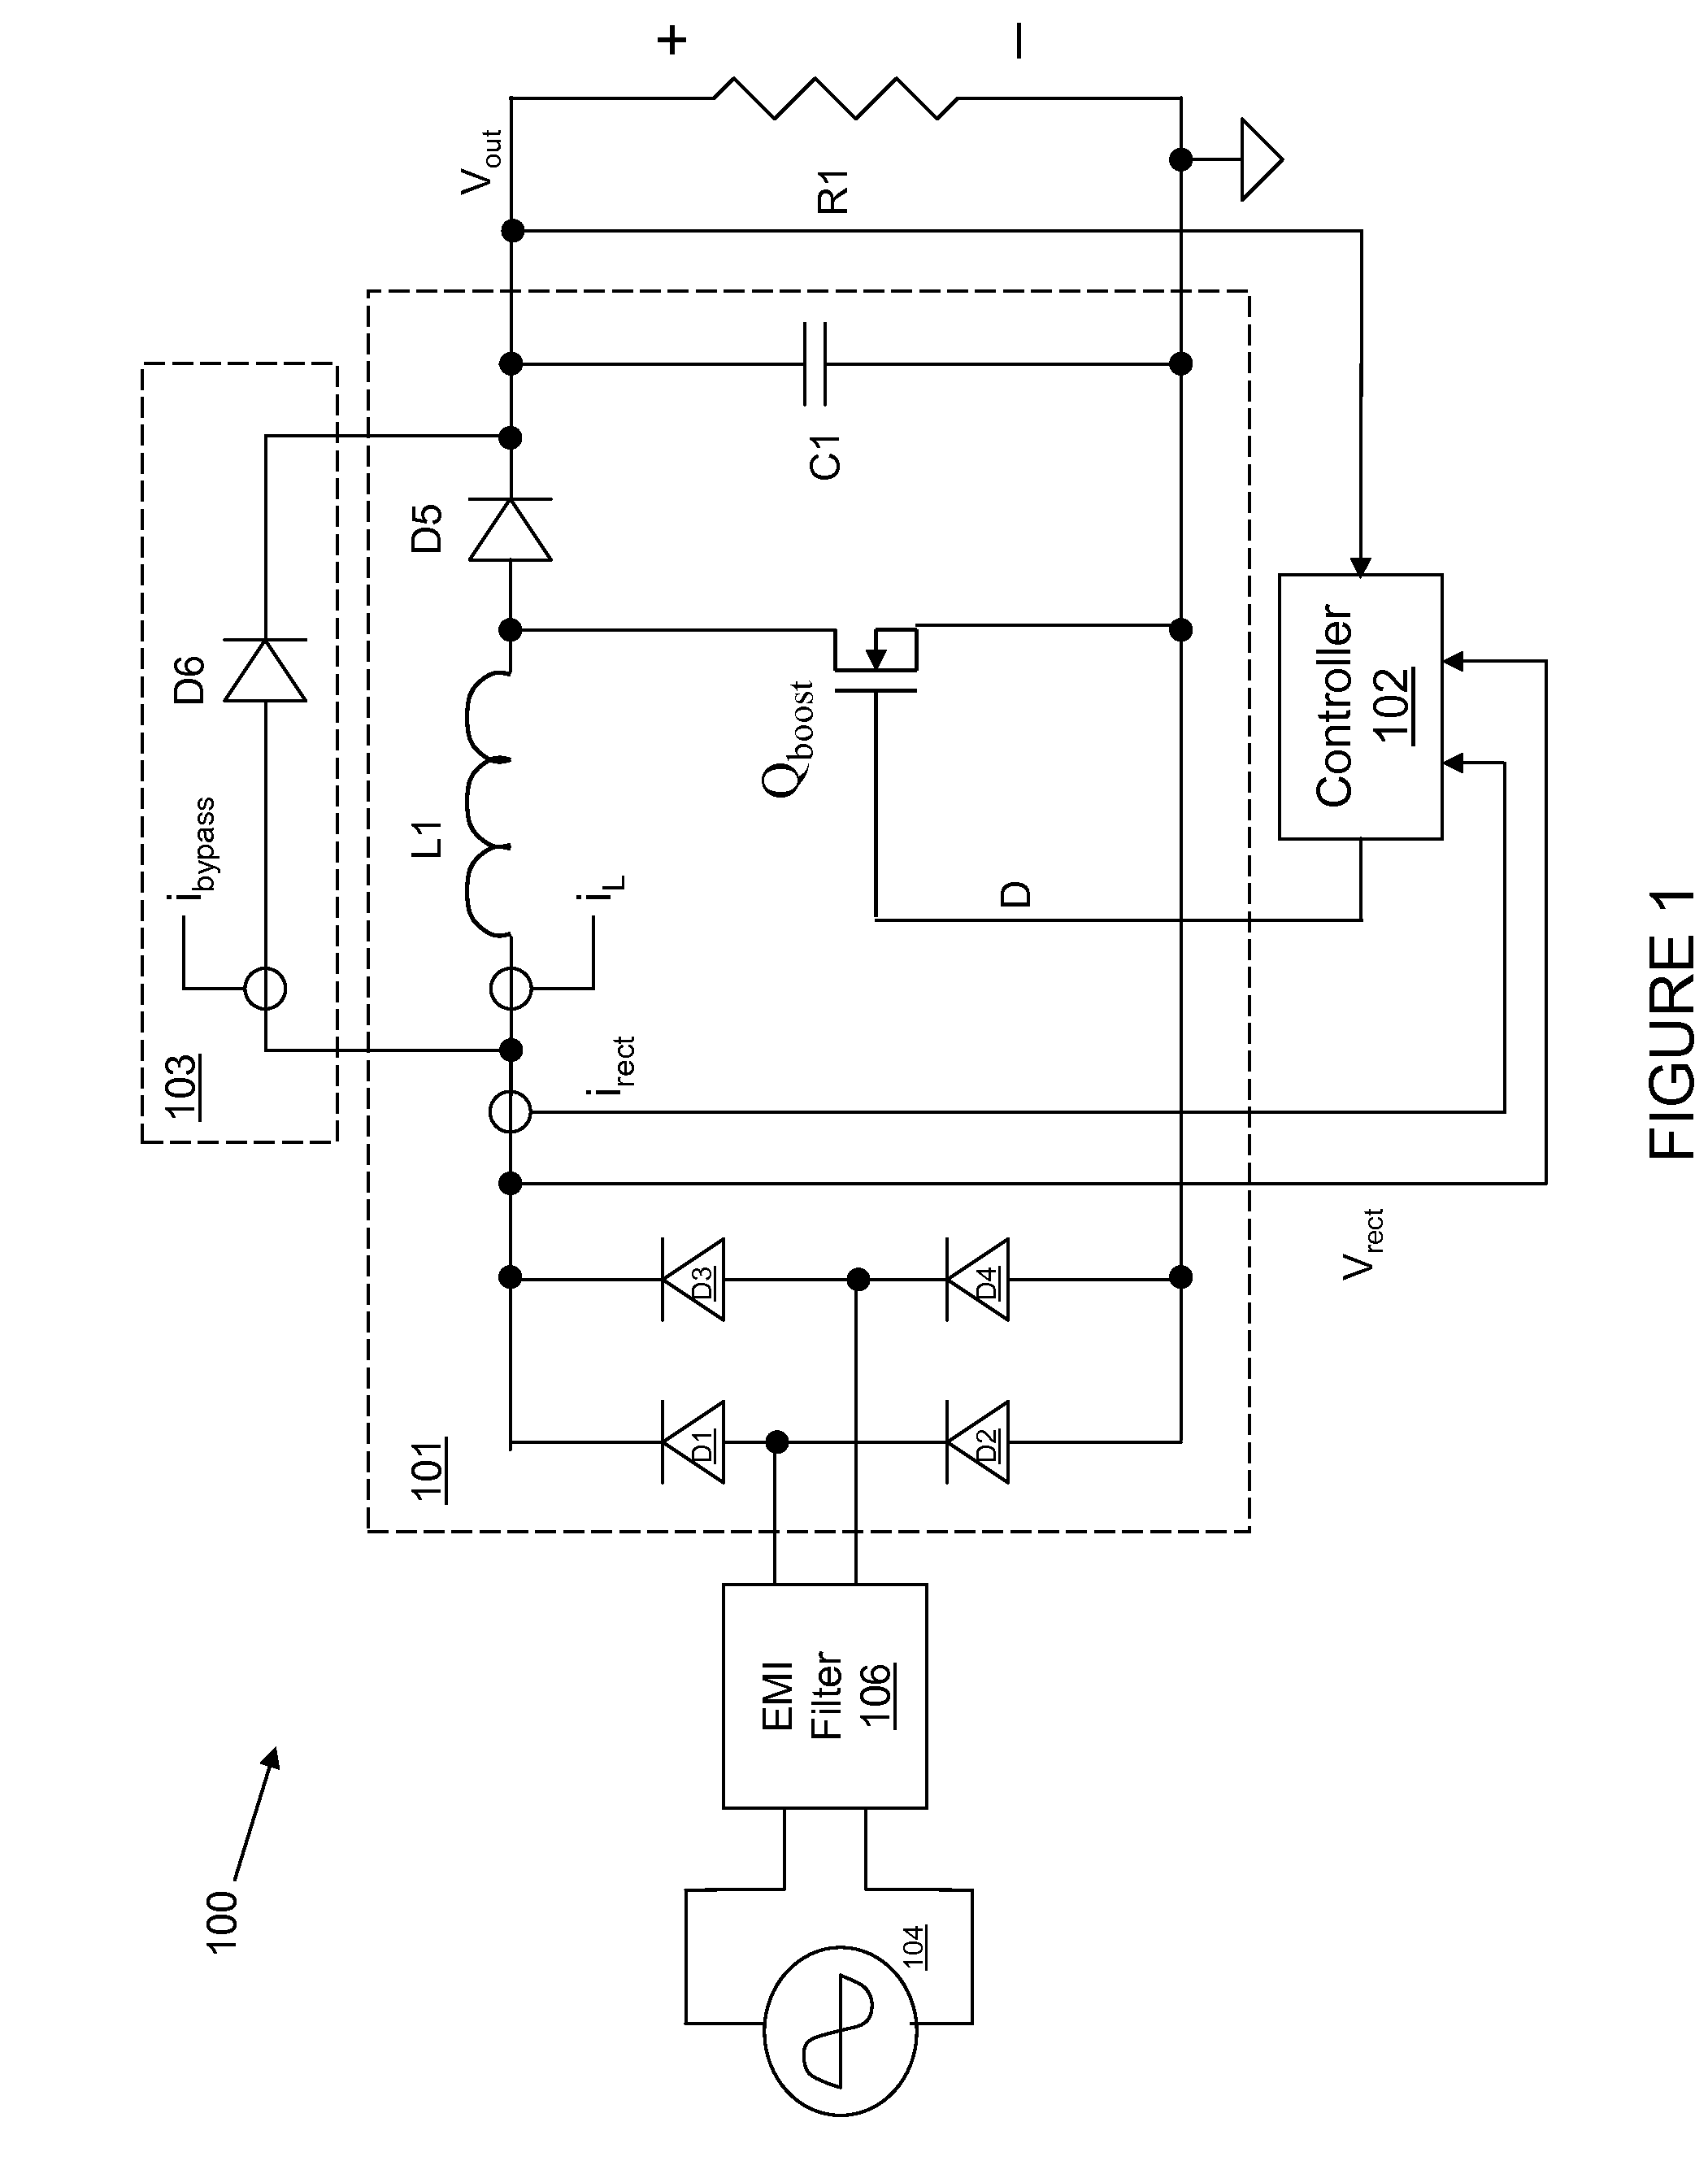 System and method for estimating input power for a power processing circuit